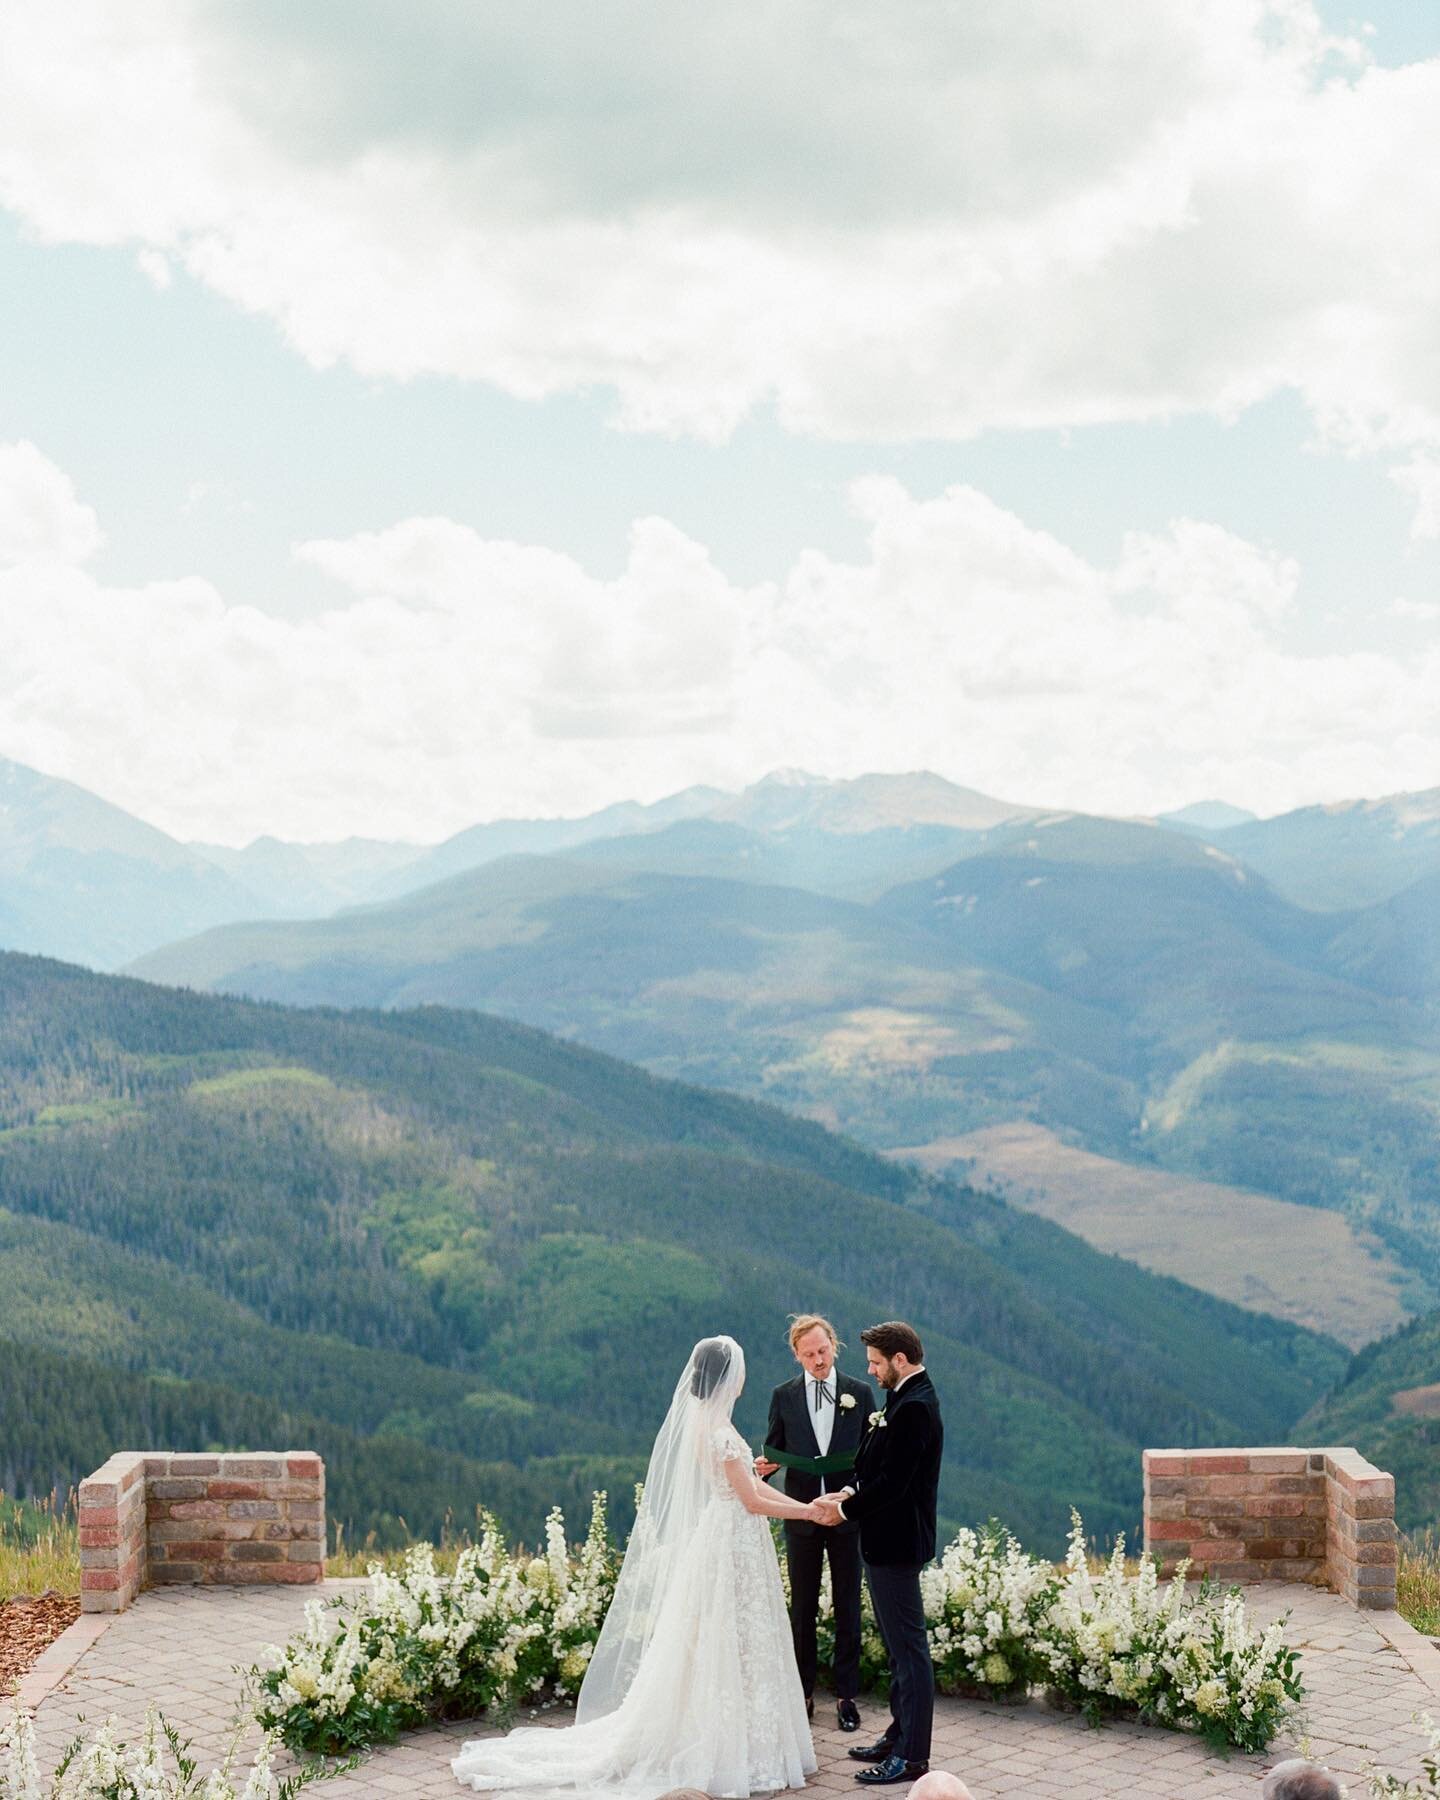 We have no idea why couples get married here. And the views are rubbish. ⁣
Maybe we should&rsquo;ve saved this post for April fools day?⁣
⁣
@lancenicoll @ivagracefloral @vailresortsweddings @arrabelleatvail @elwynnandcass 
⁣
#banksandleaflove #elevat